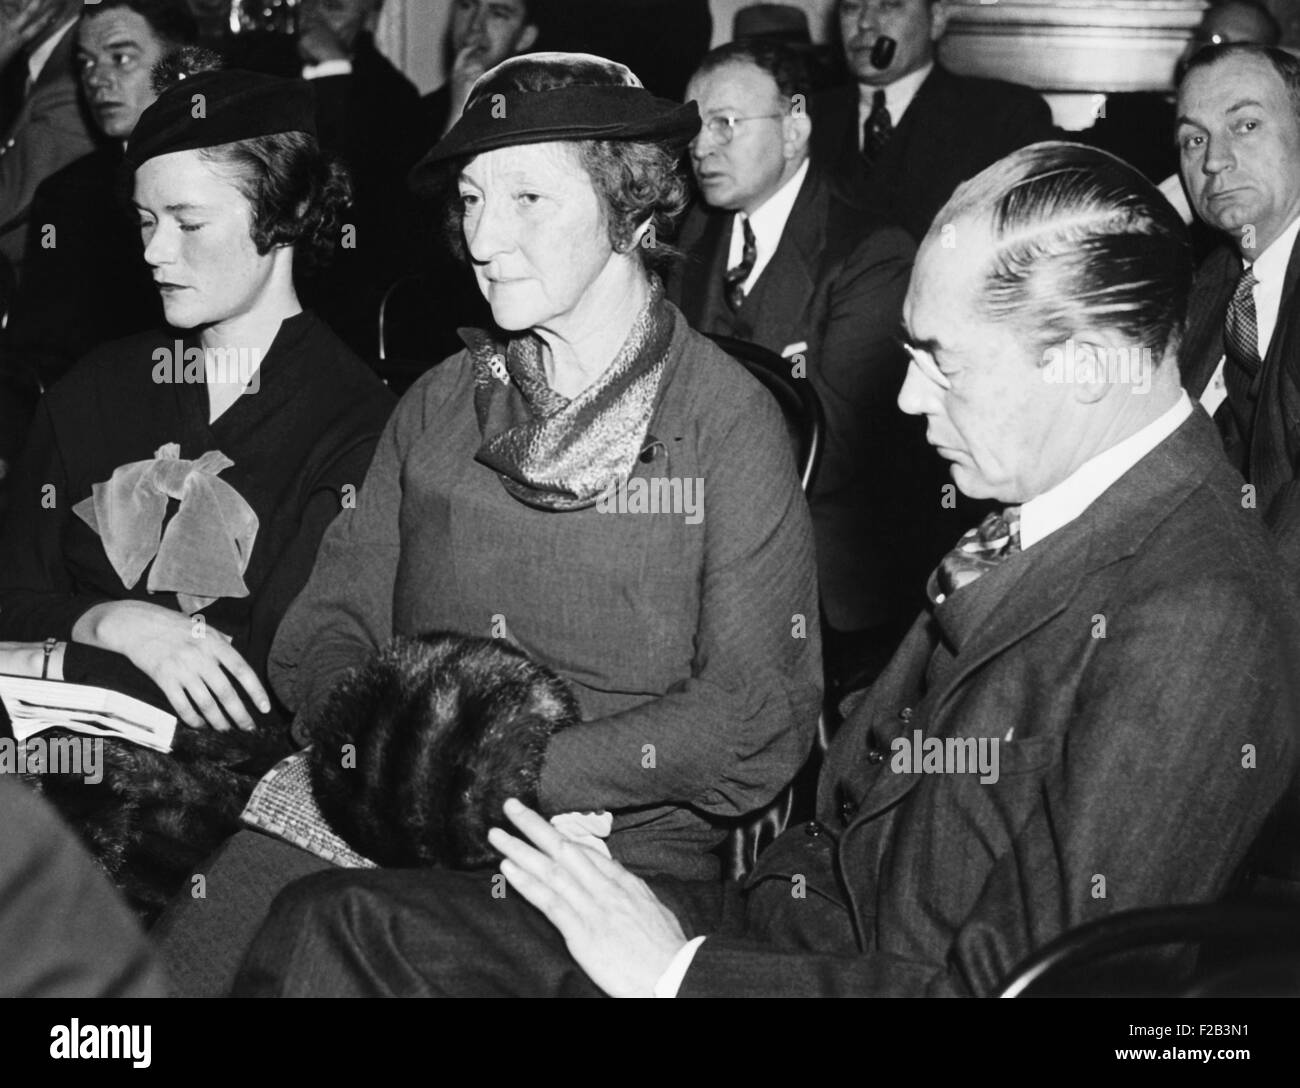 DuPont Ladies at Munitions probe. Right to left: Felix DuPont, Mrs. DuPont and their daughter Lydia, pictured as spectators before the Senate Munitions probe, Dec. 17, 1934. - (CSU 2015 5 50) Stock Photo